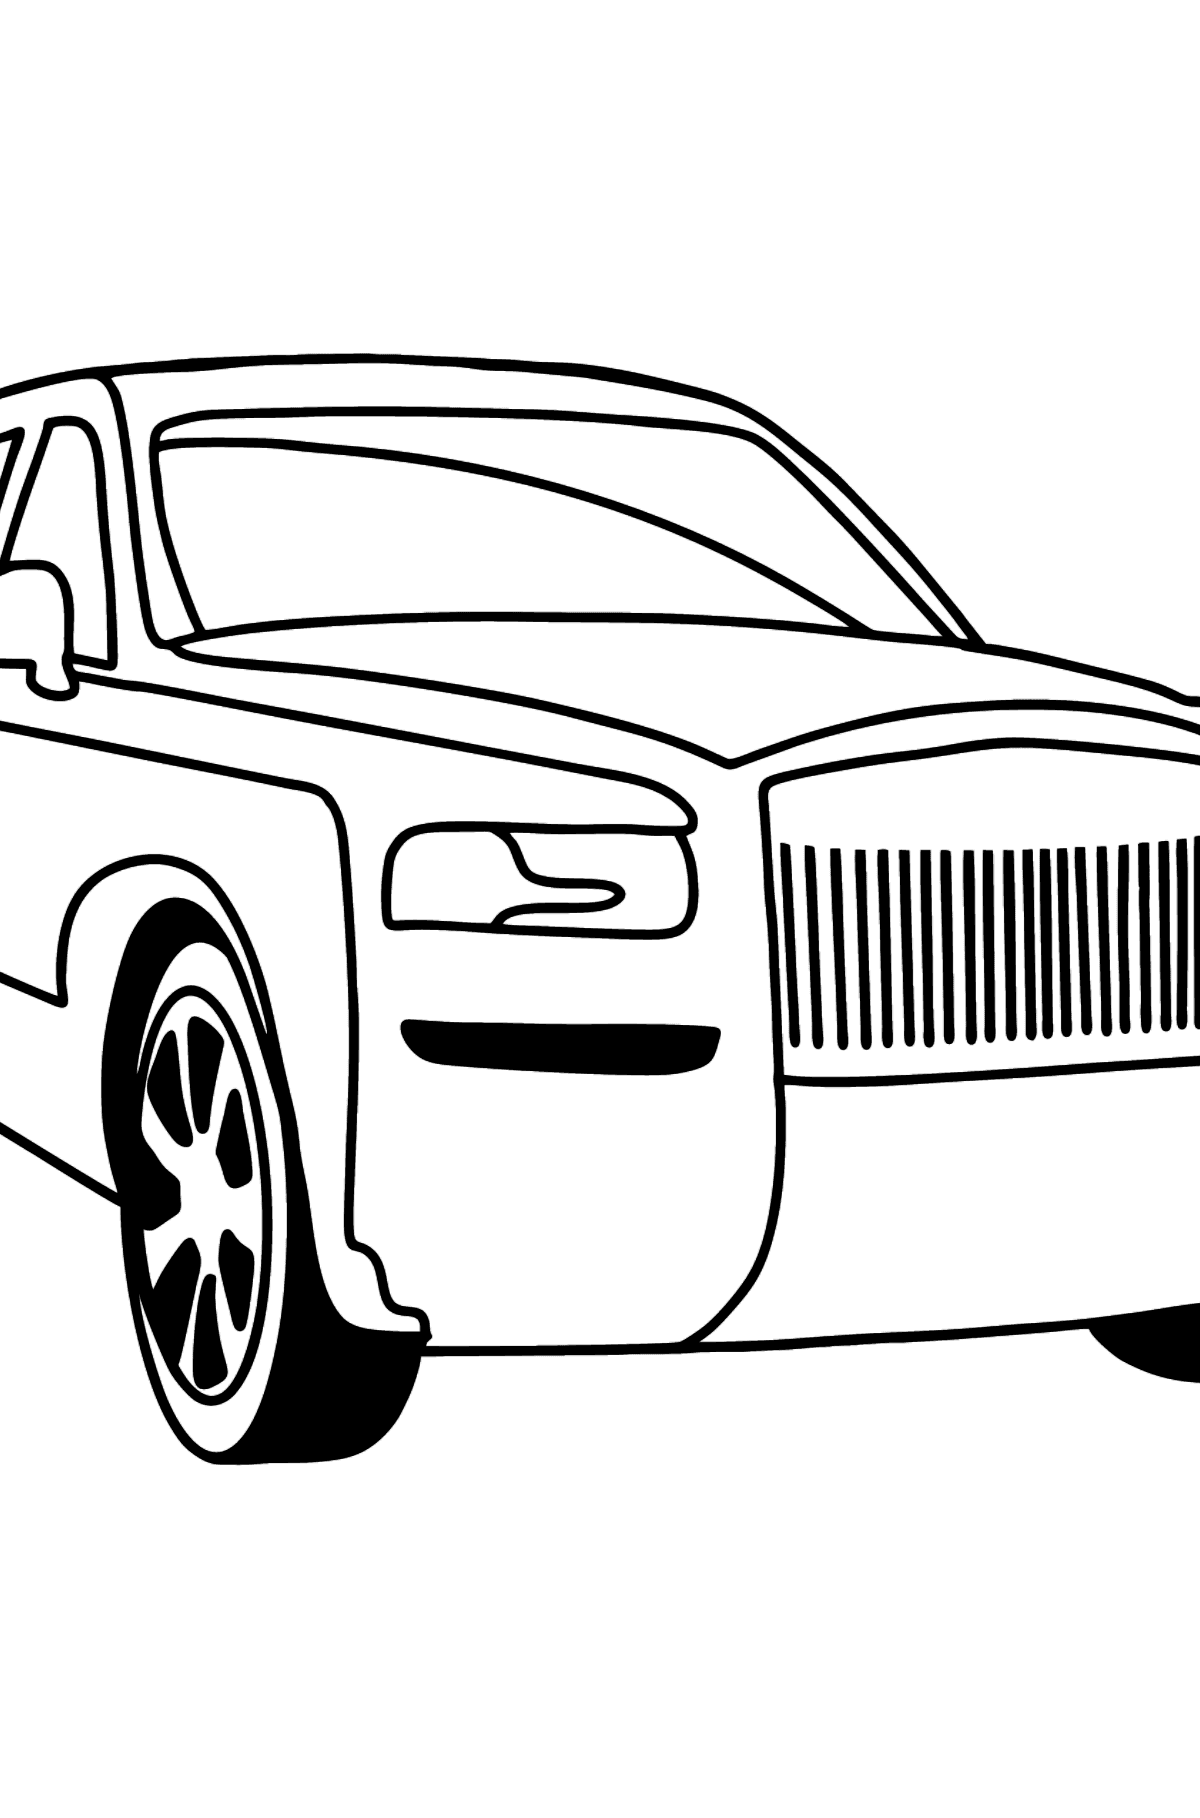 Rolls Royce Cullinan Car coloring page - Coloring Pages for Kids